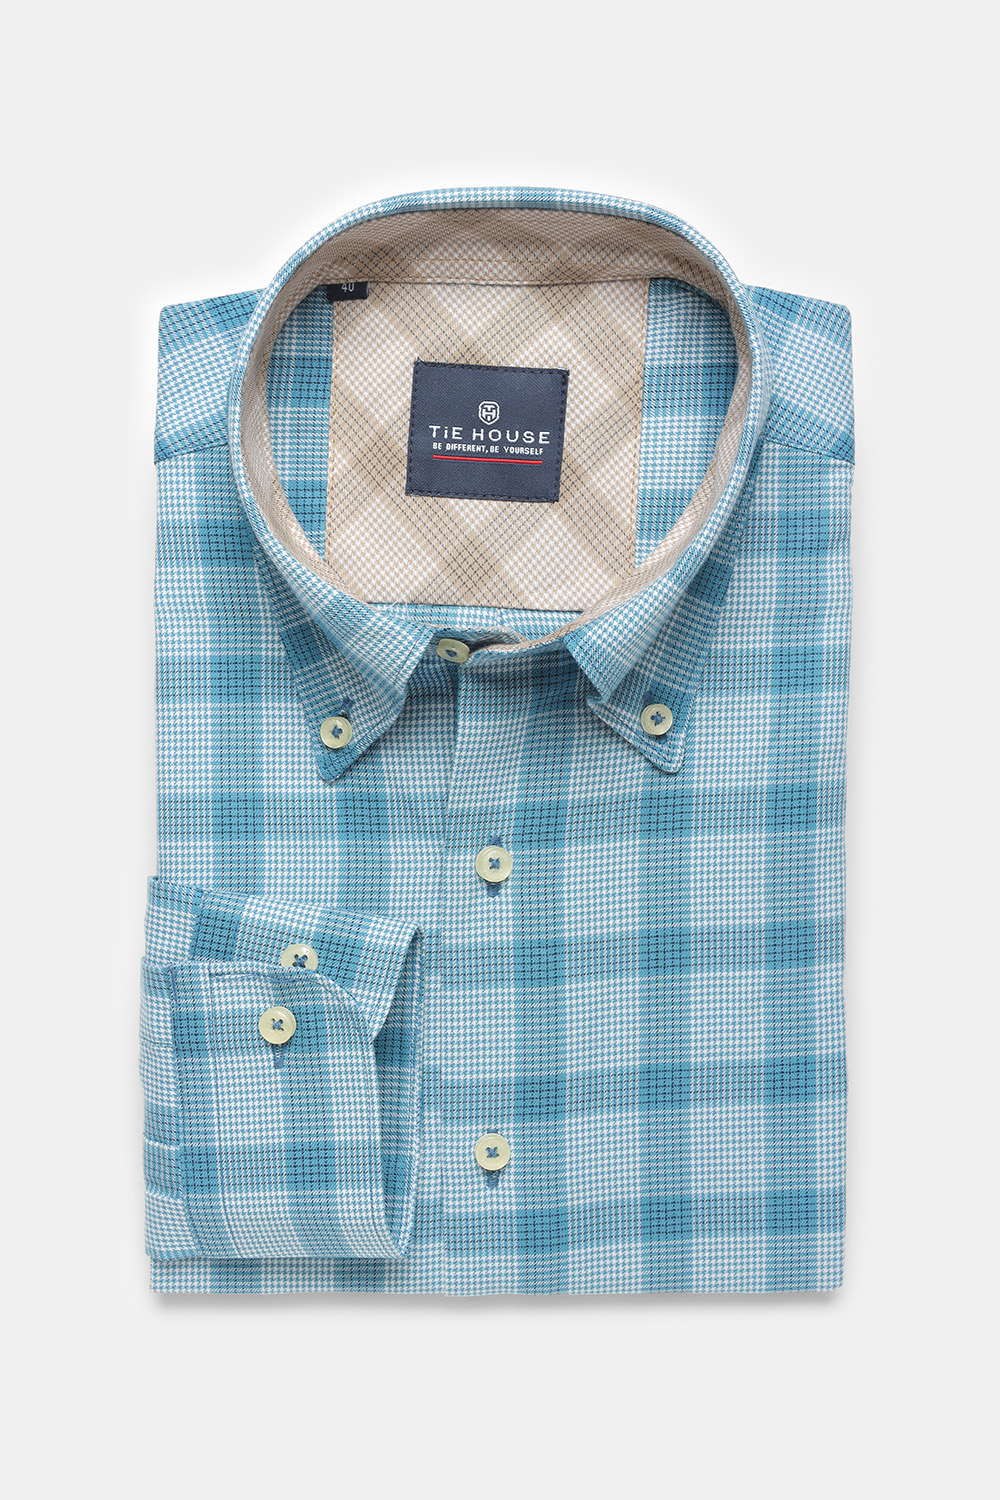 Regular Fit Shirt Turquoise - TIE HOUSE